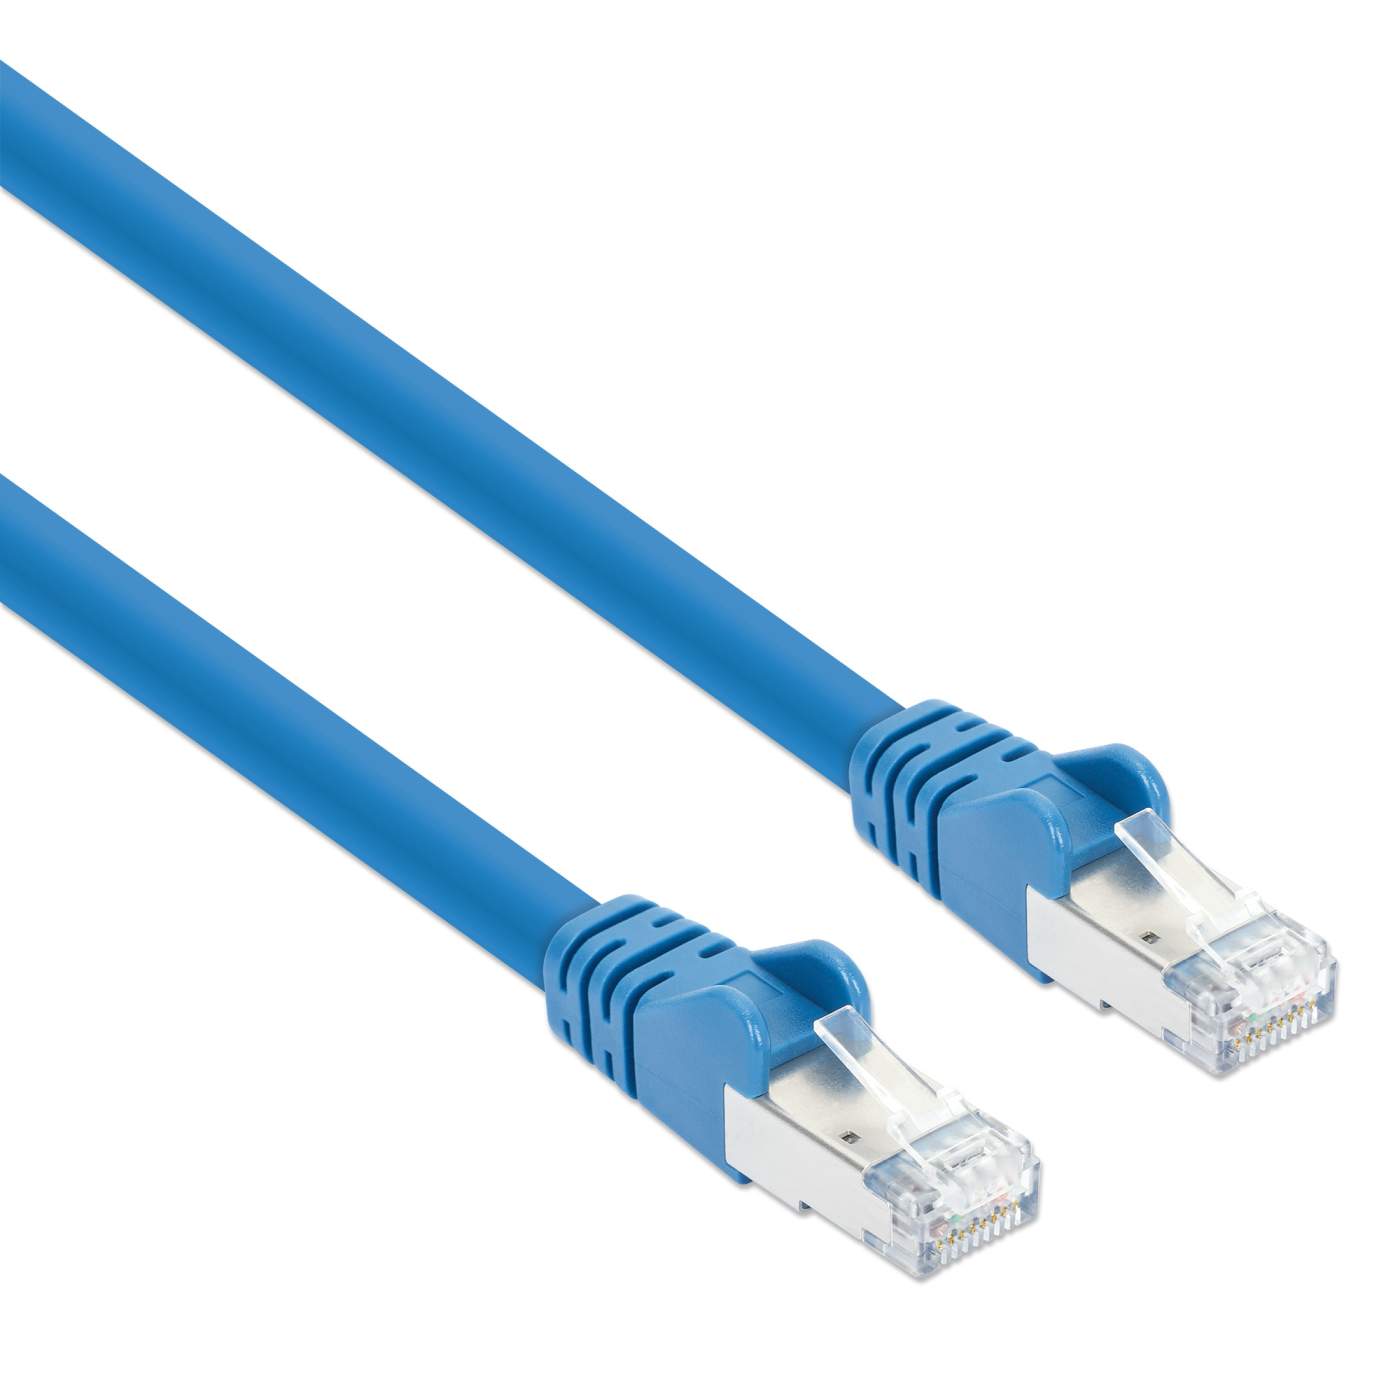 NEW CAT8 50FT Ethernet High Speed Gold-Plated Cable with RJ45